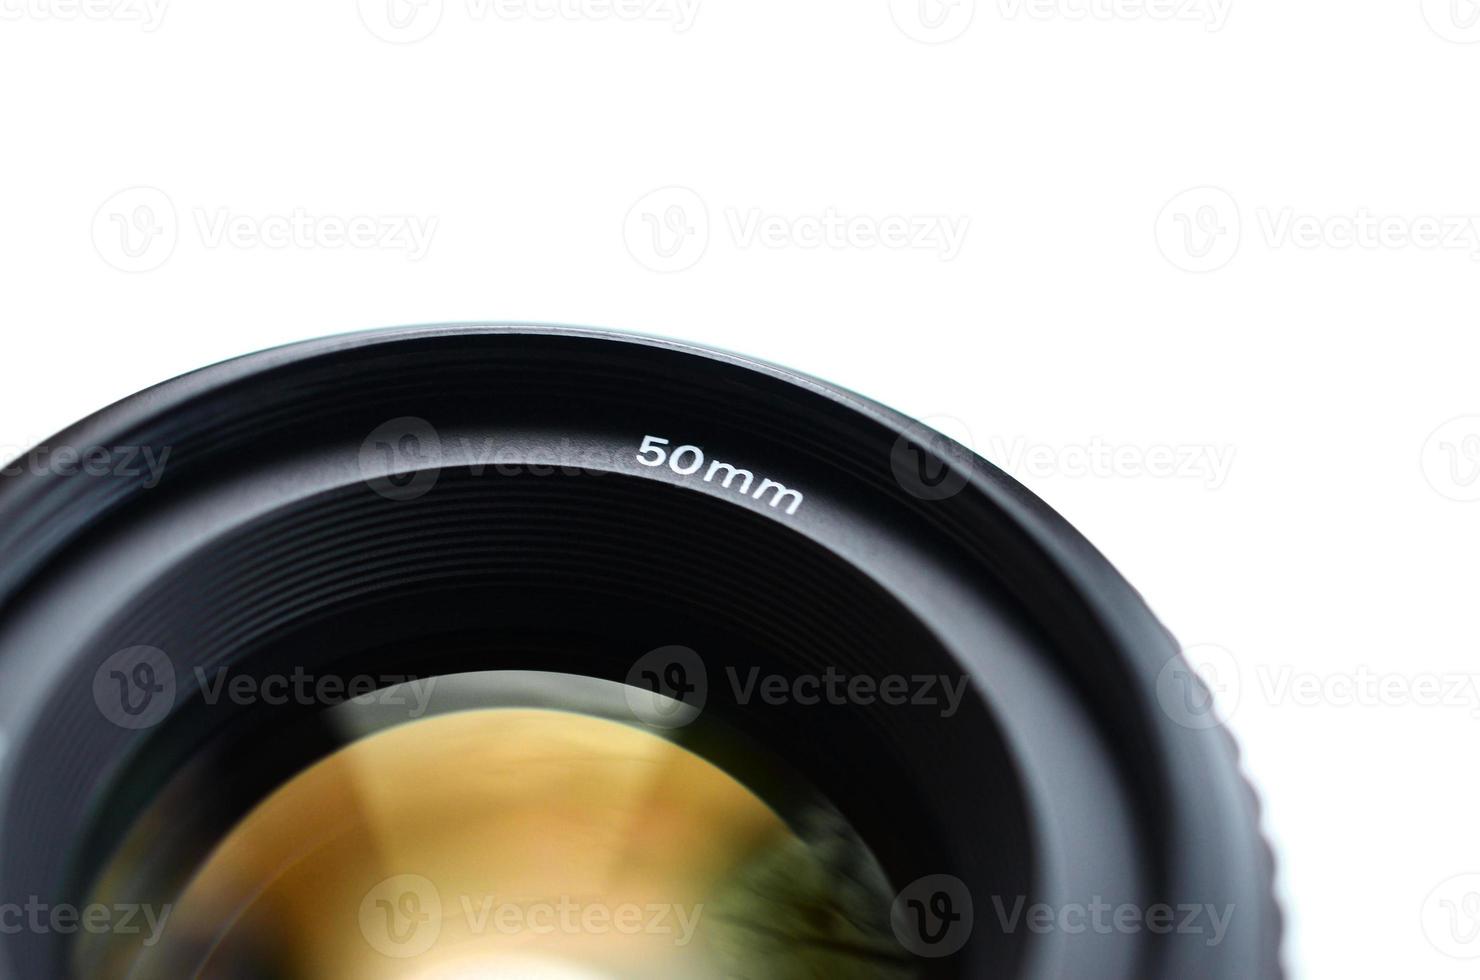 Fragment of a portrait lens for a modern SLR camera. A photograph of a wide-aperture lens with a focal length of 50mm isolated on white photo